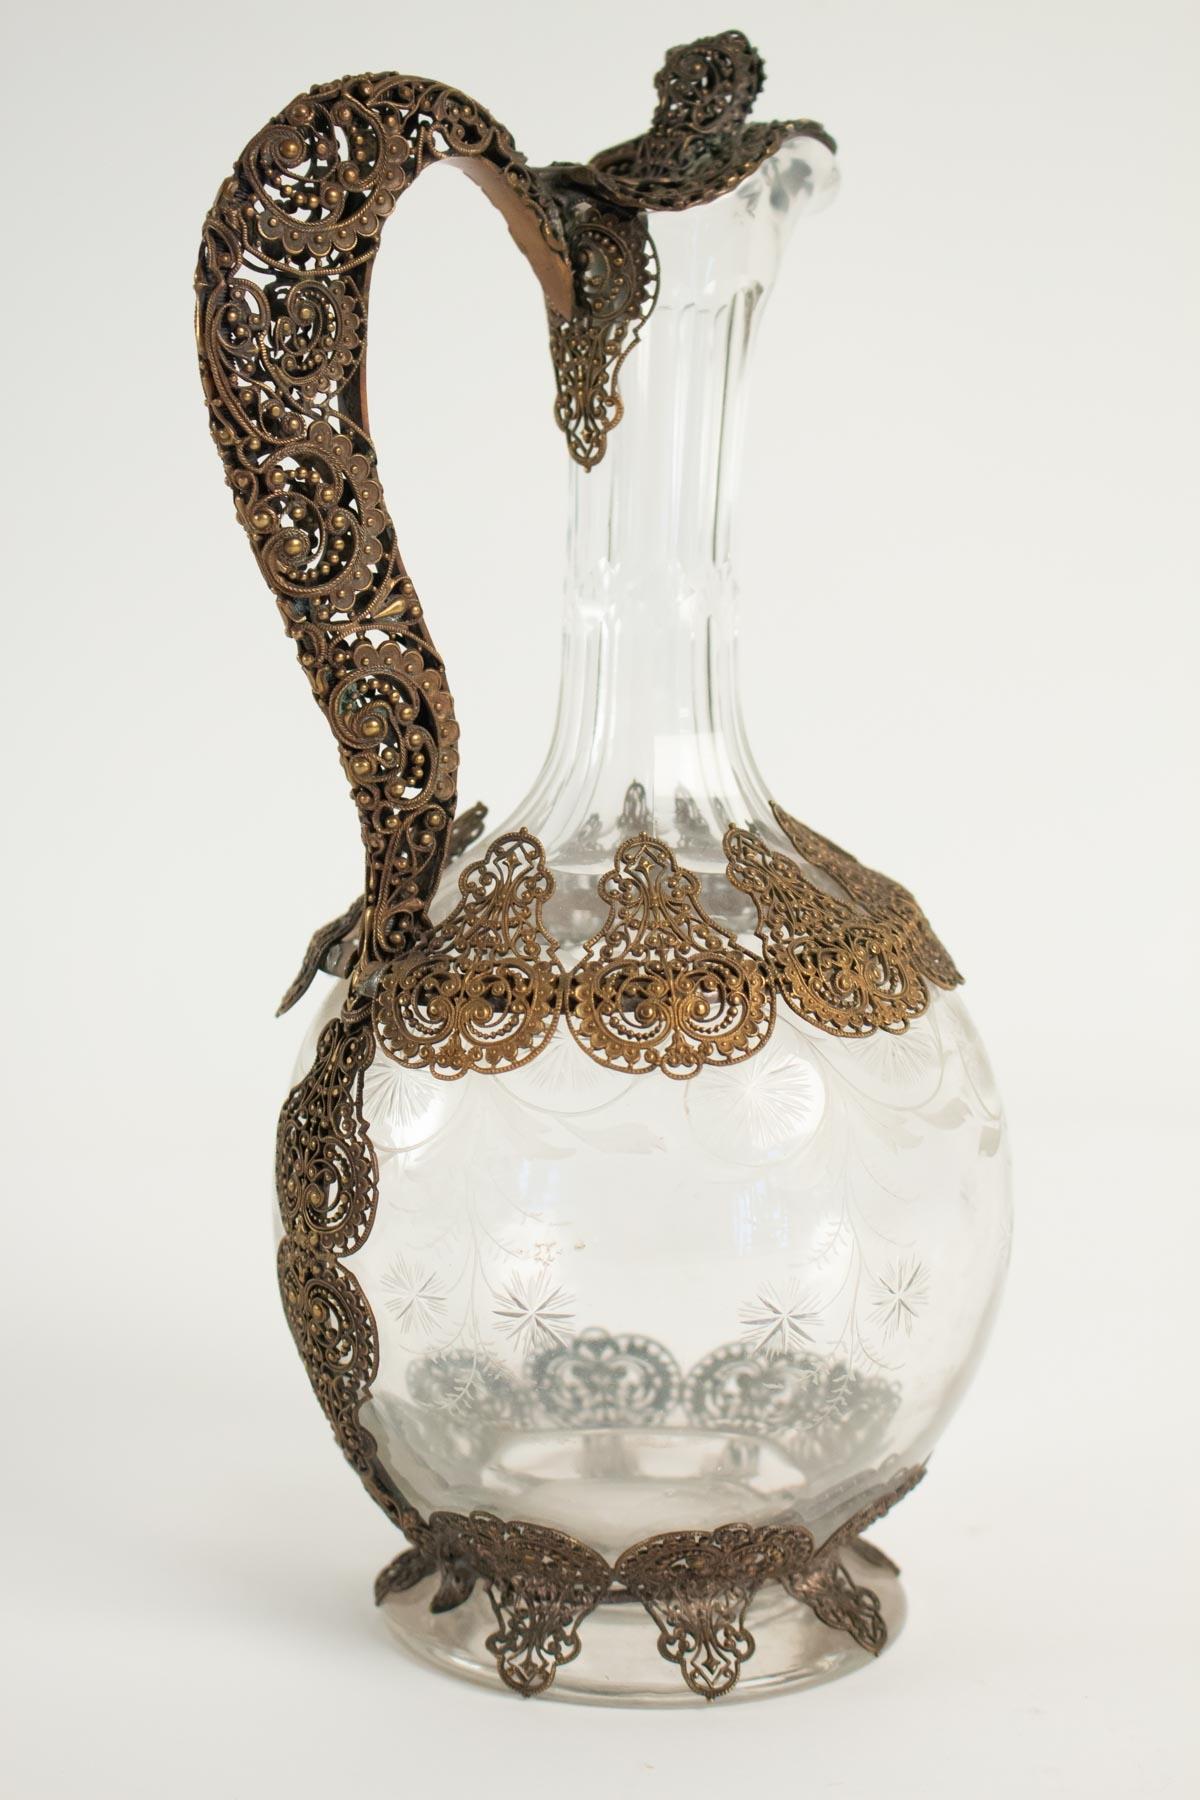 Crystal and gilt metal decanter.
Circa 1900
Drawings of flowers on the crystal.
The gilded metal is worked like lace.
Measures: Height 27 cm
Width 14 cm.